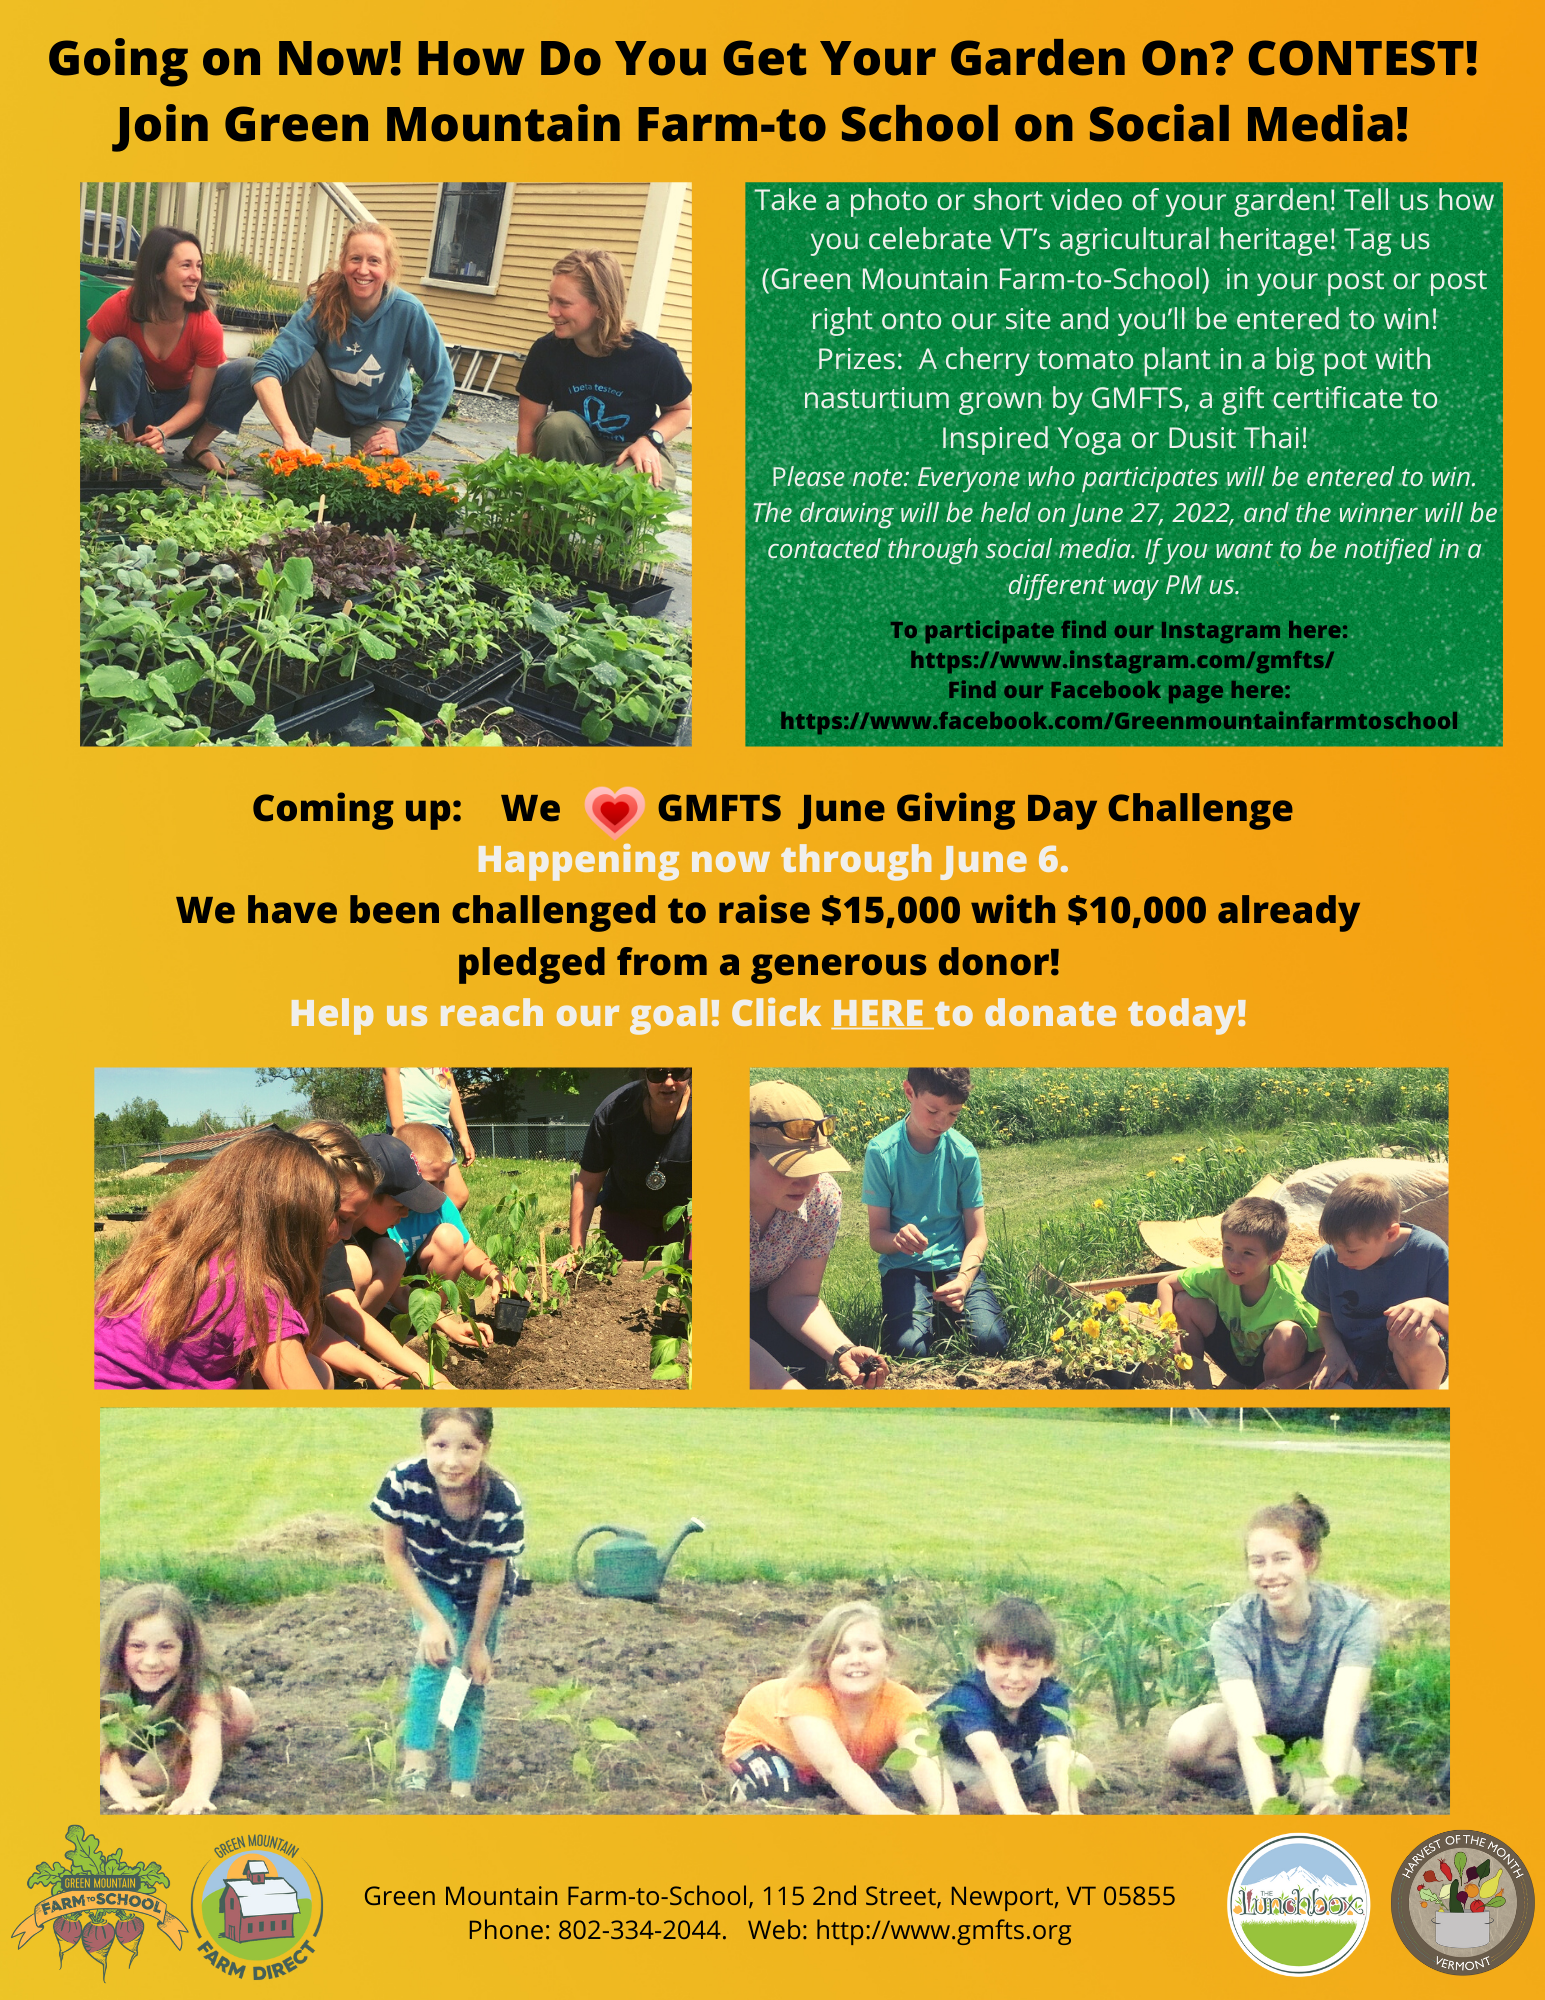 Going on Now! How Do You Get Your Garden On? CONTEST!